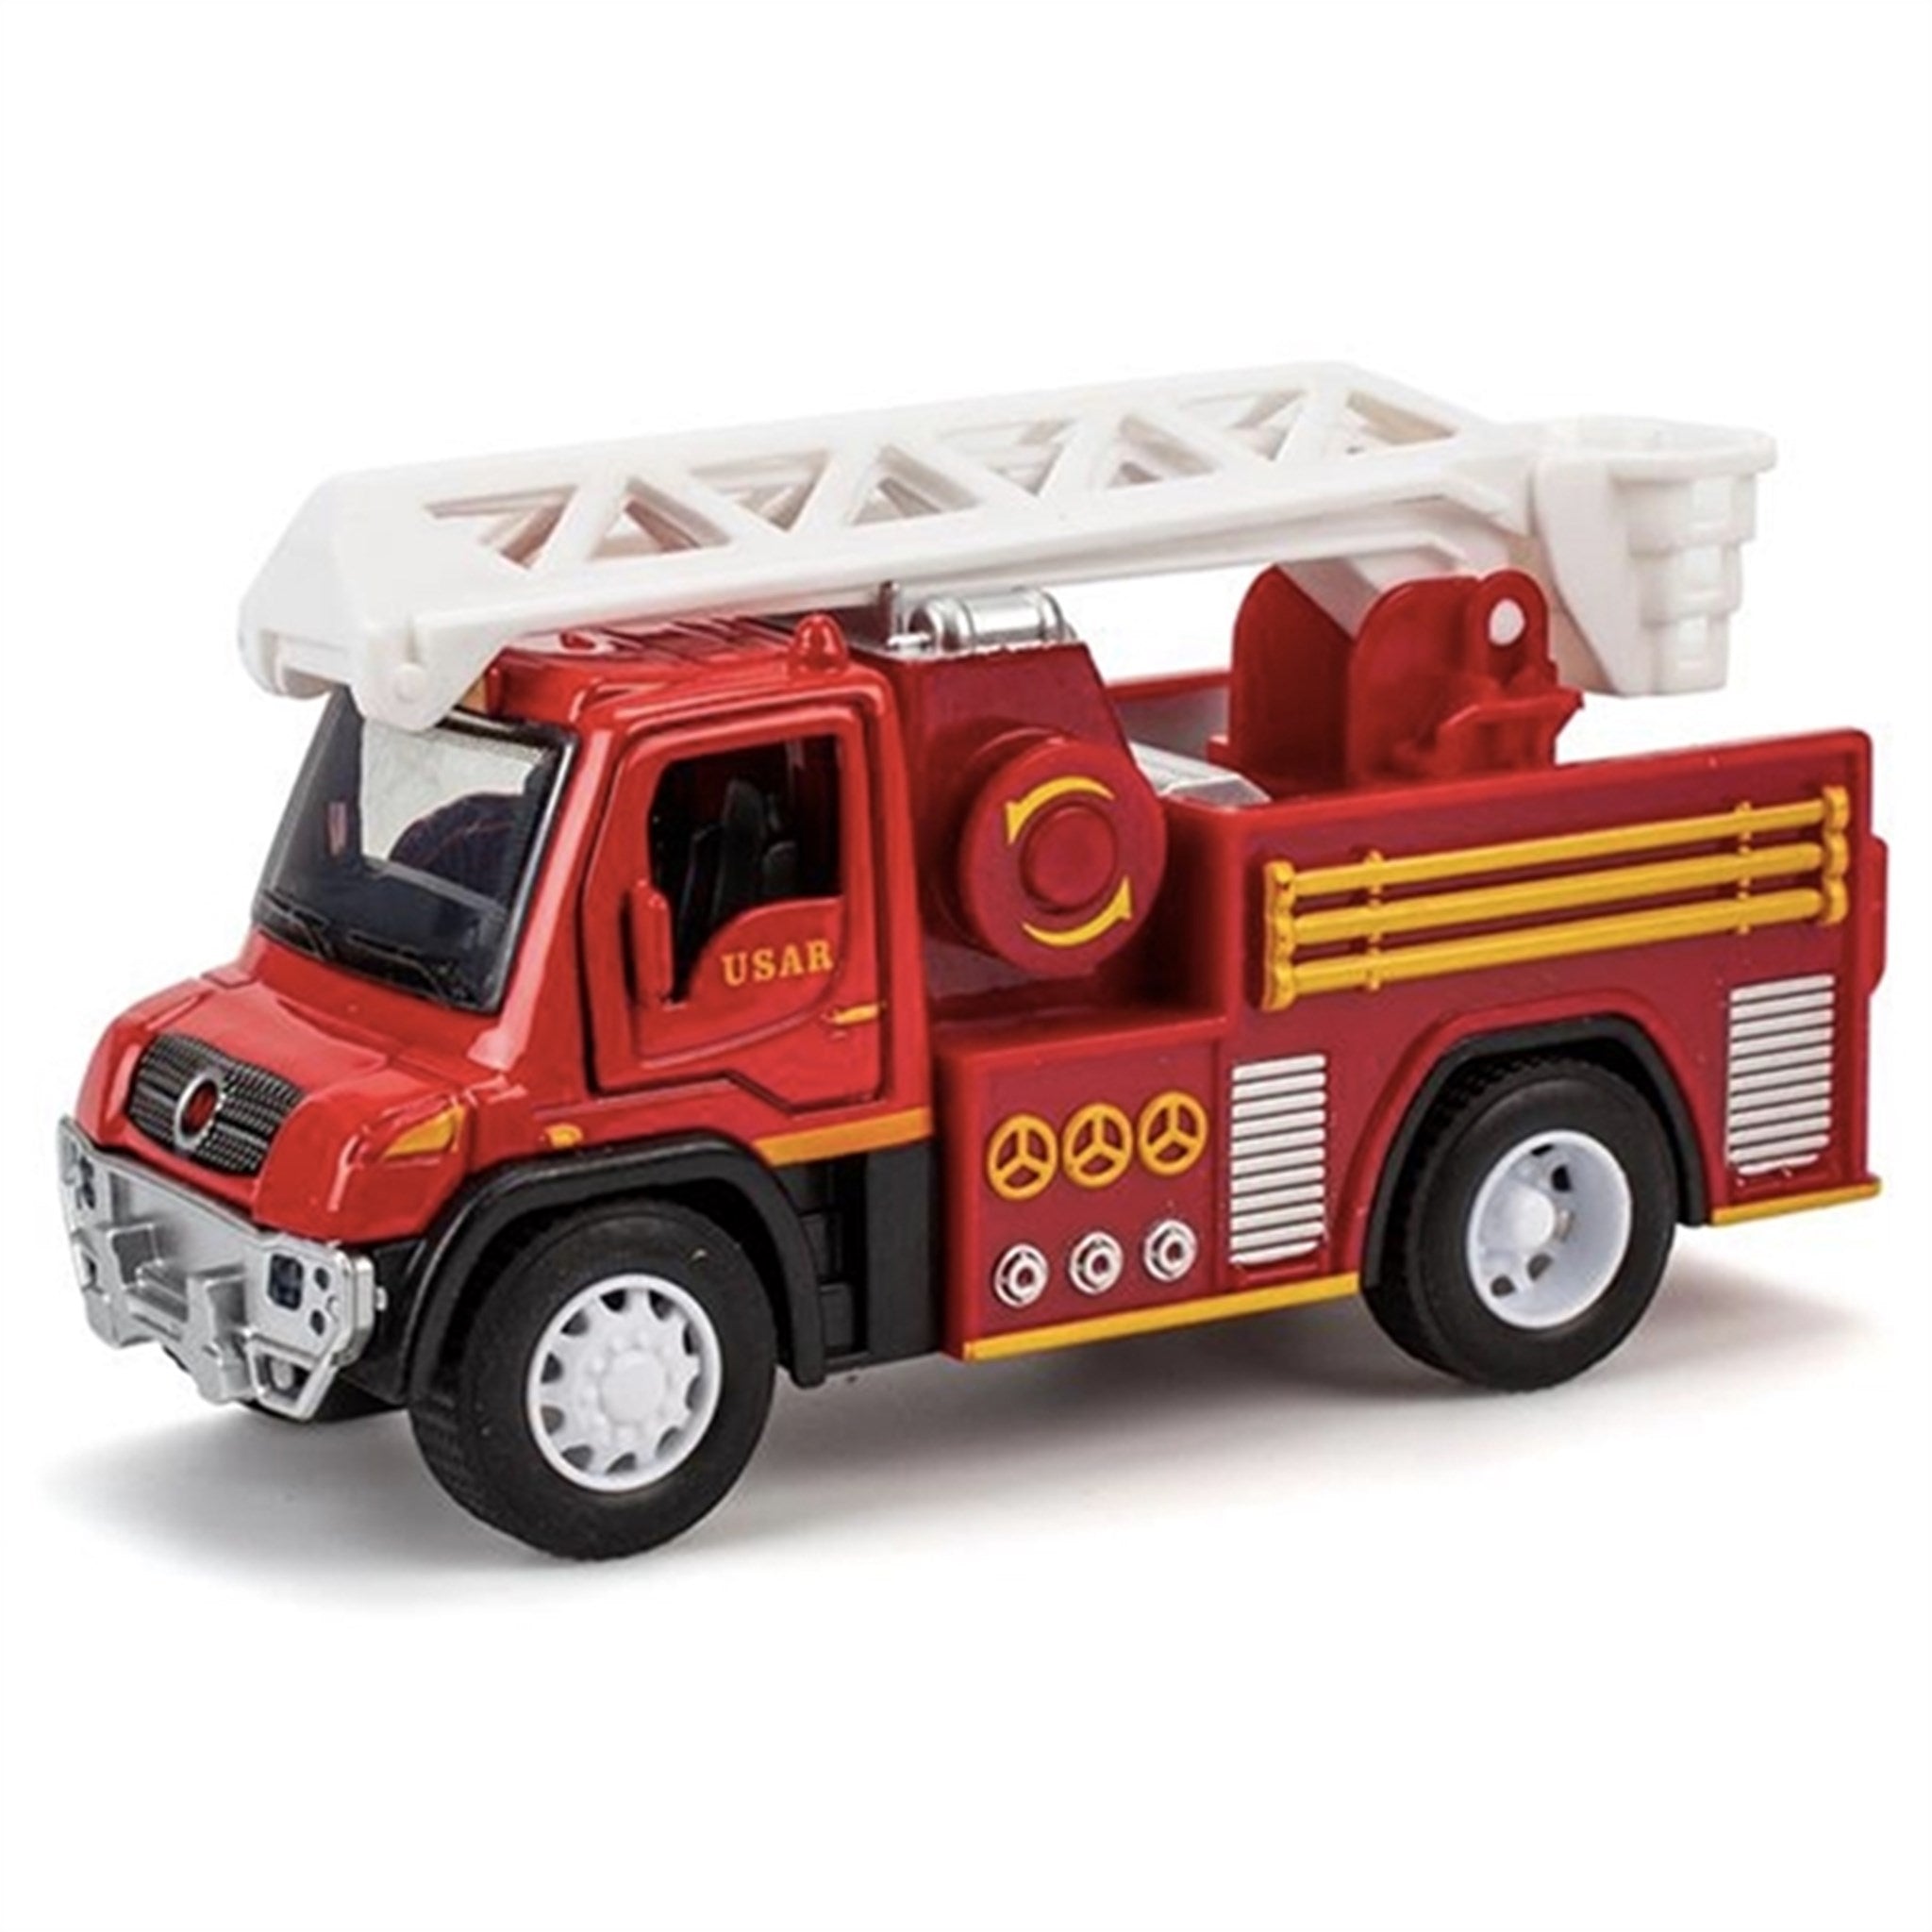 Magni Fire Truck With Light And Sound 2